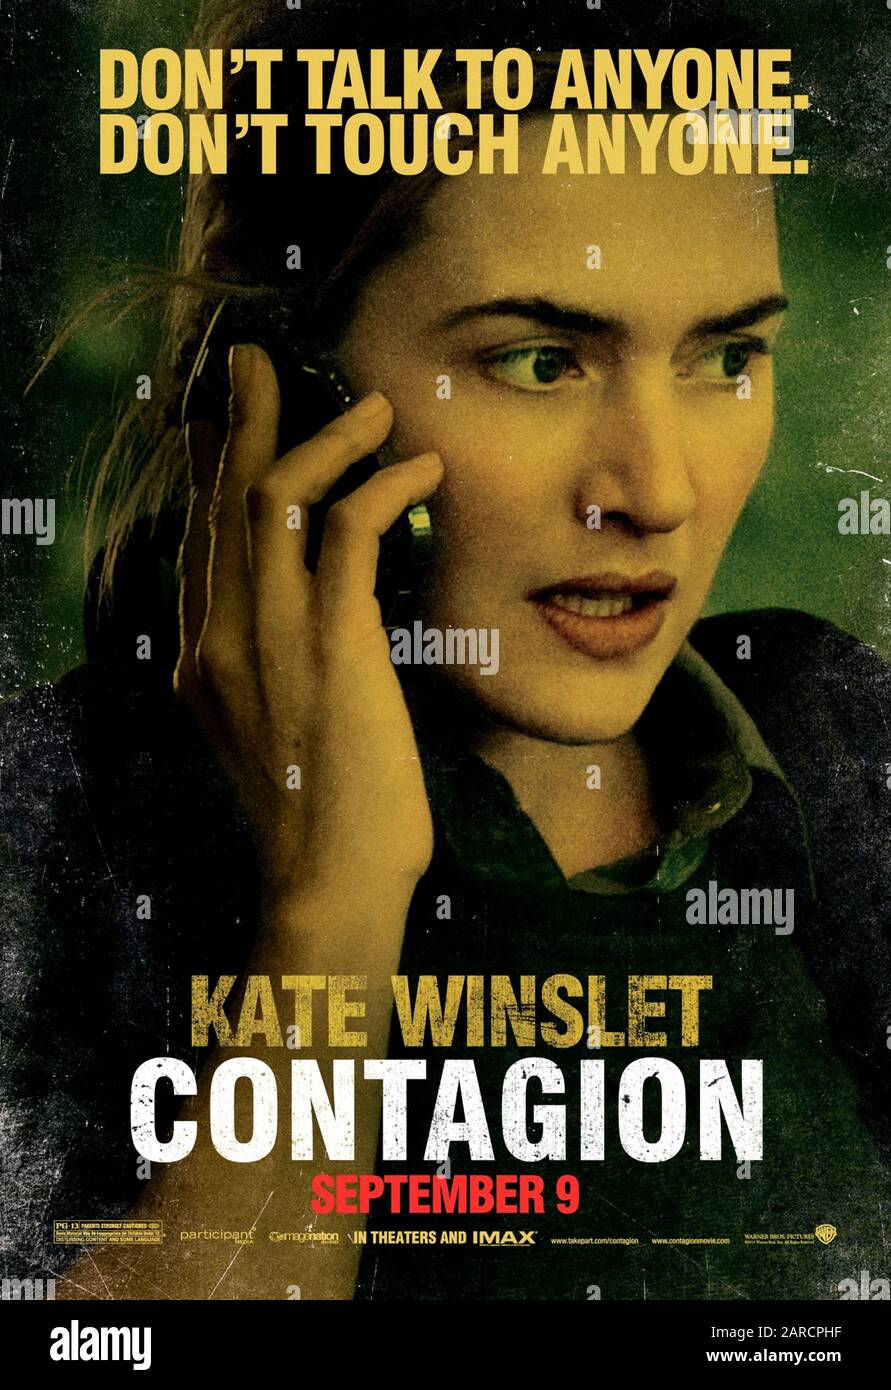 Contagion (2011) directed by Steven Soderbergh and starring Kate Winslet as Dr. Erin Mears in this accurate portrayal of the spread of a deadly virus and resulting pandemic. Stock Photo